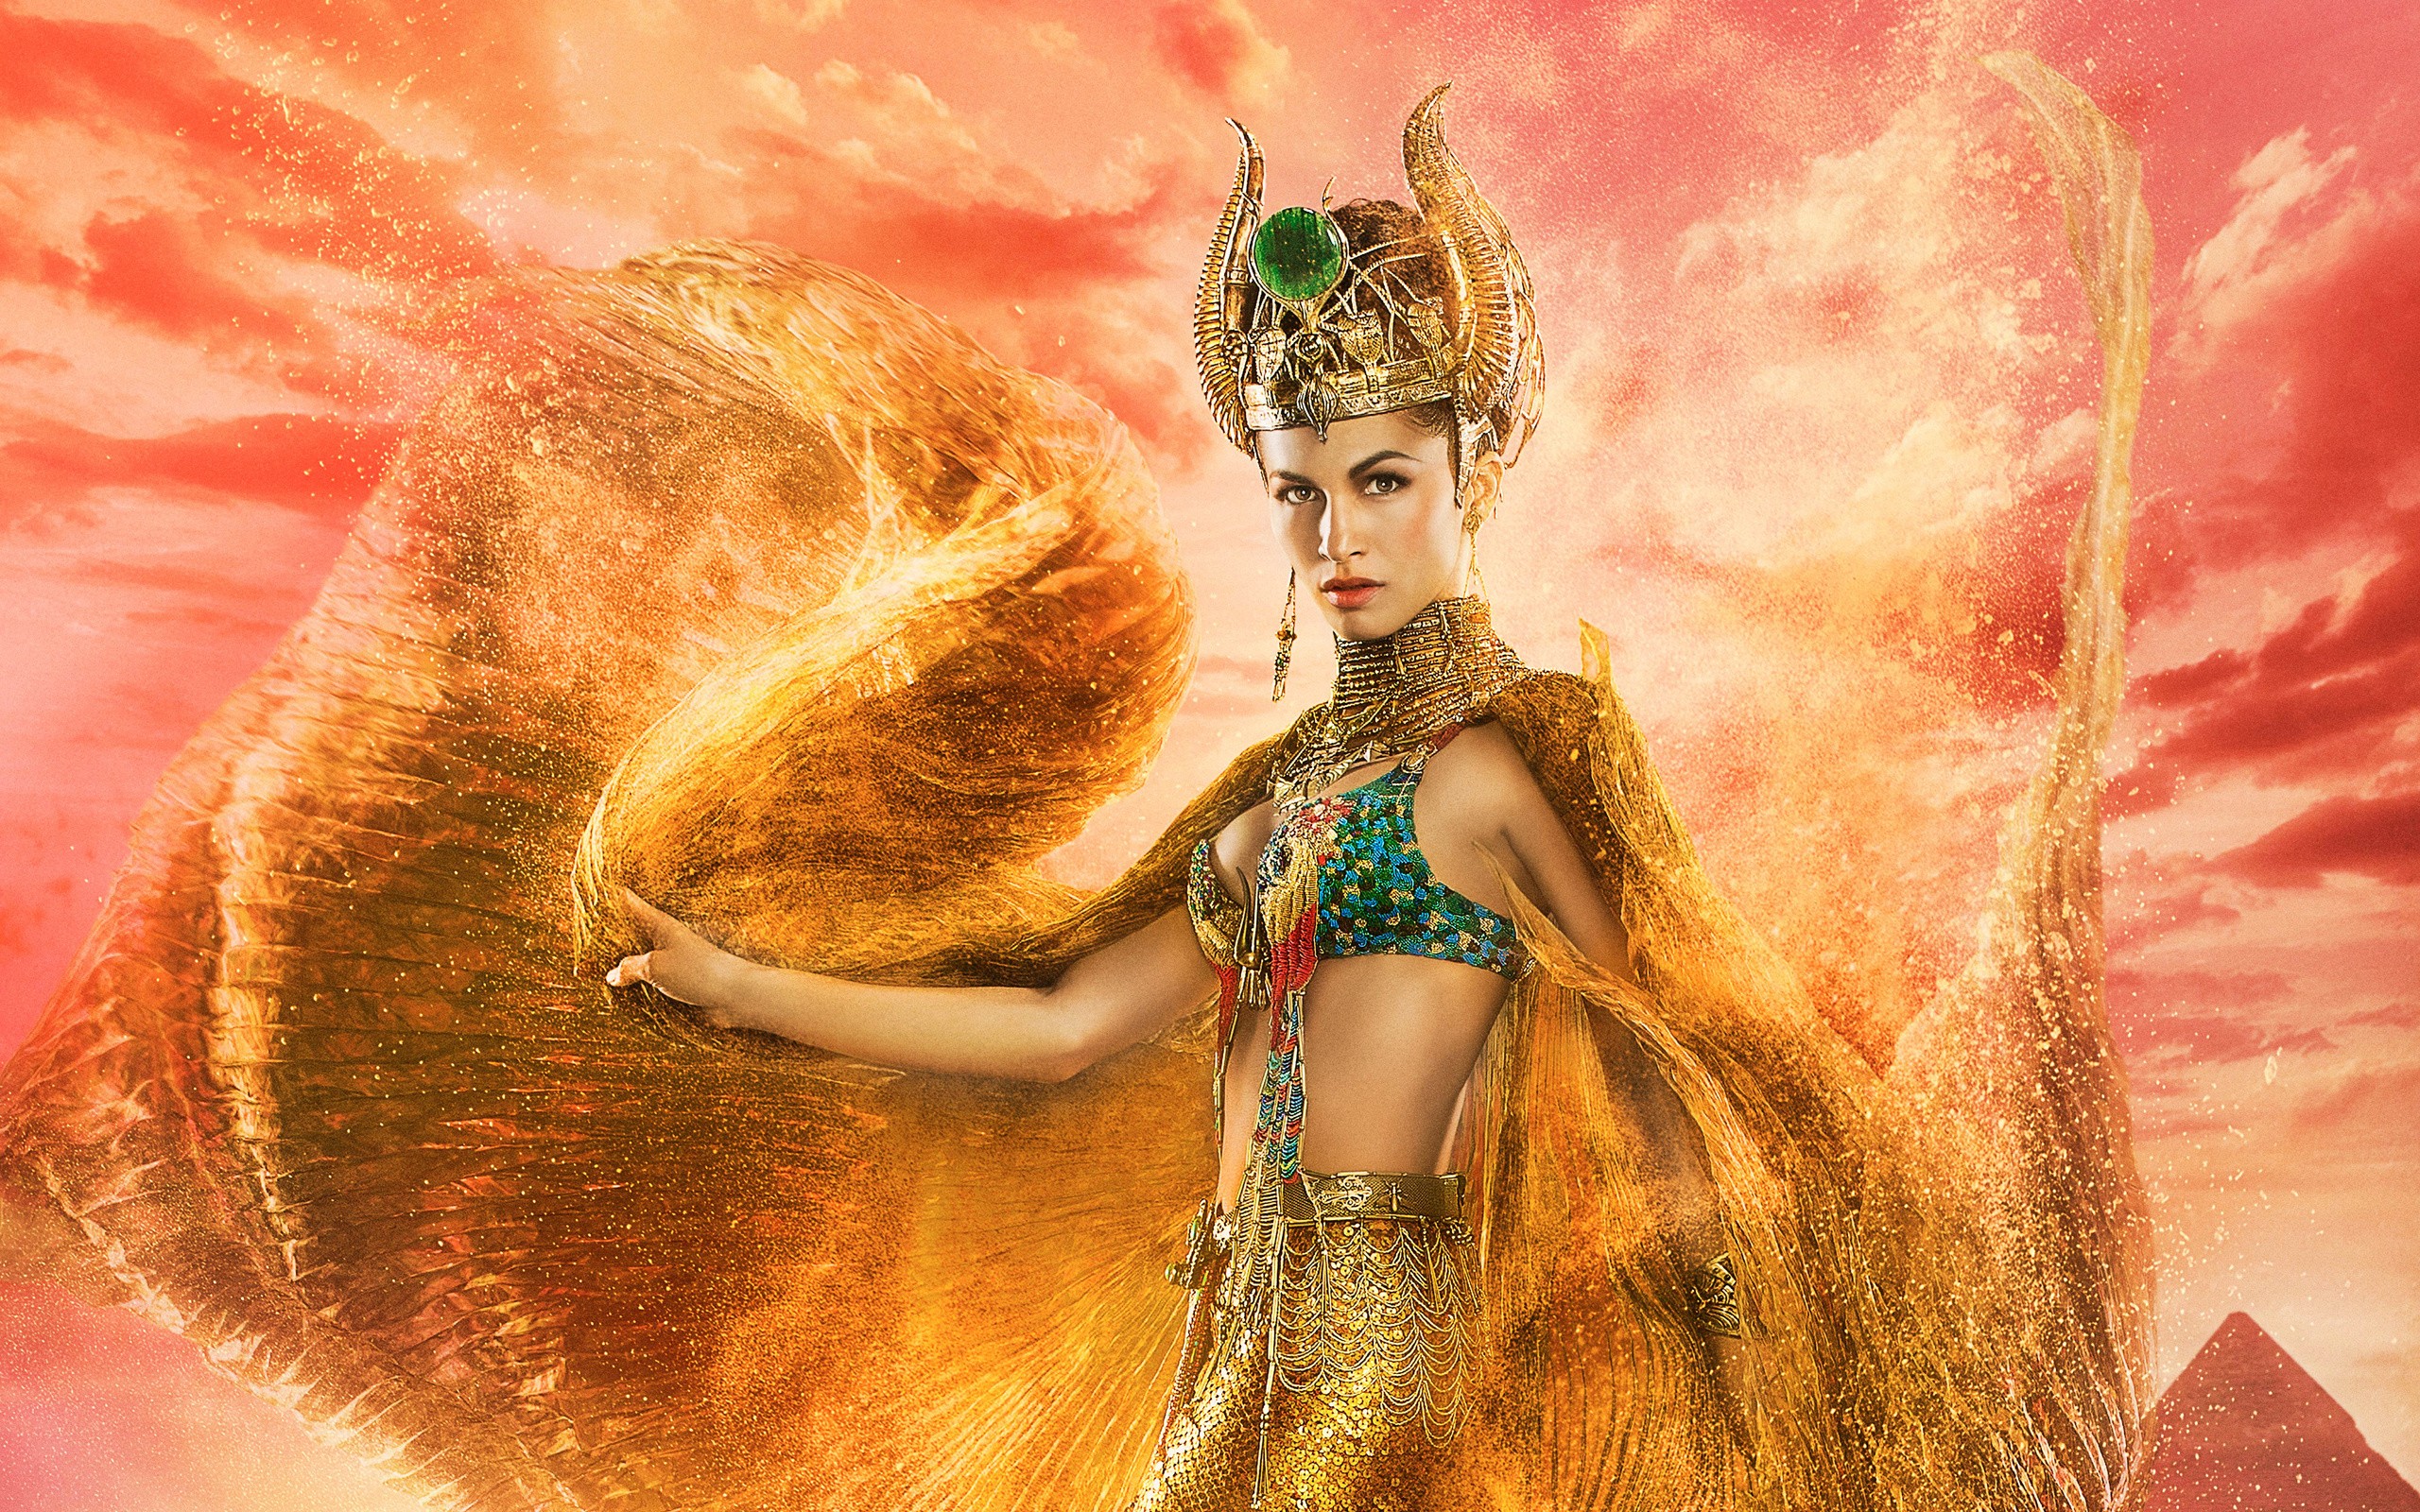 General 2560x1600 Gods of Egypt fantasy girl women movies Elodie Yung looking at viewer